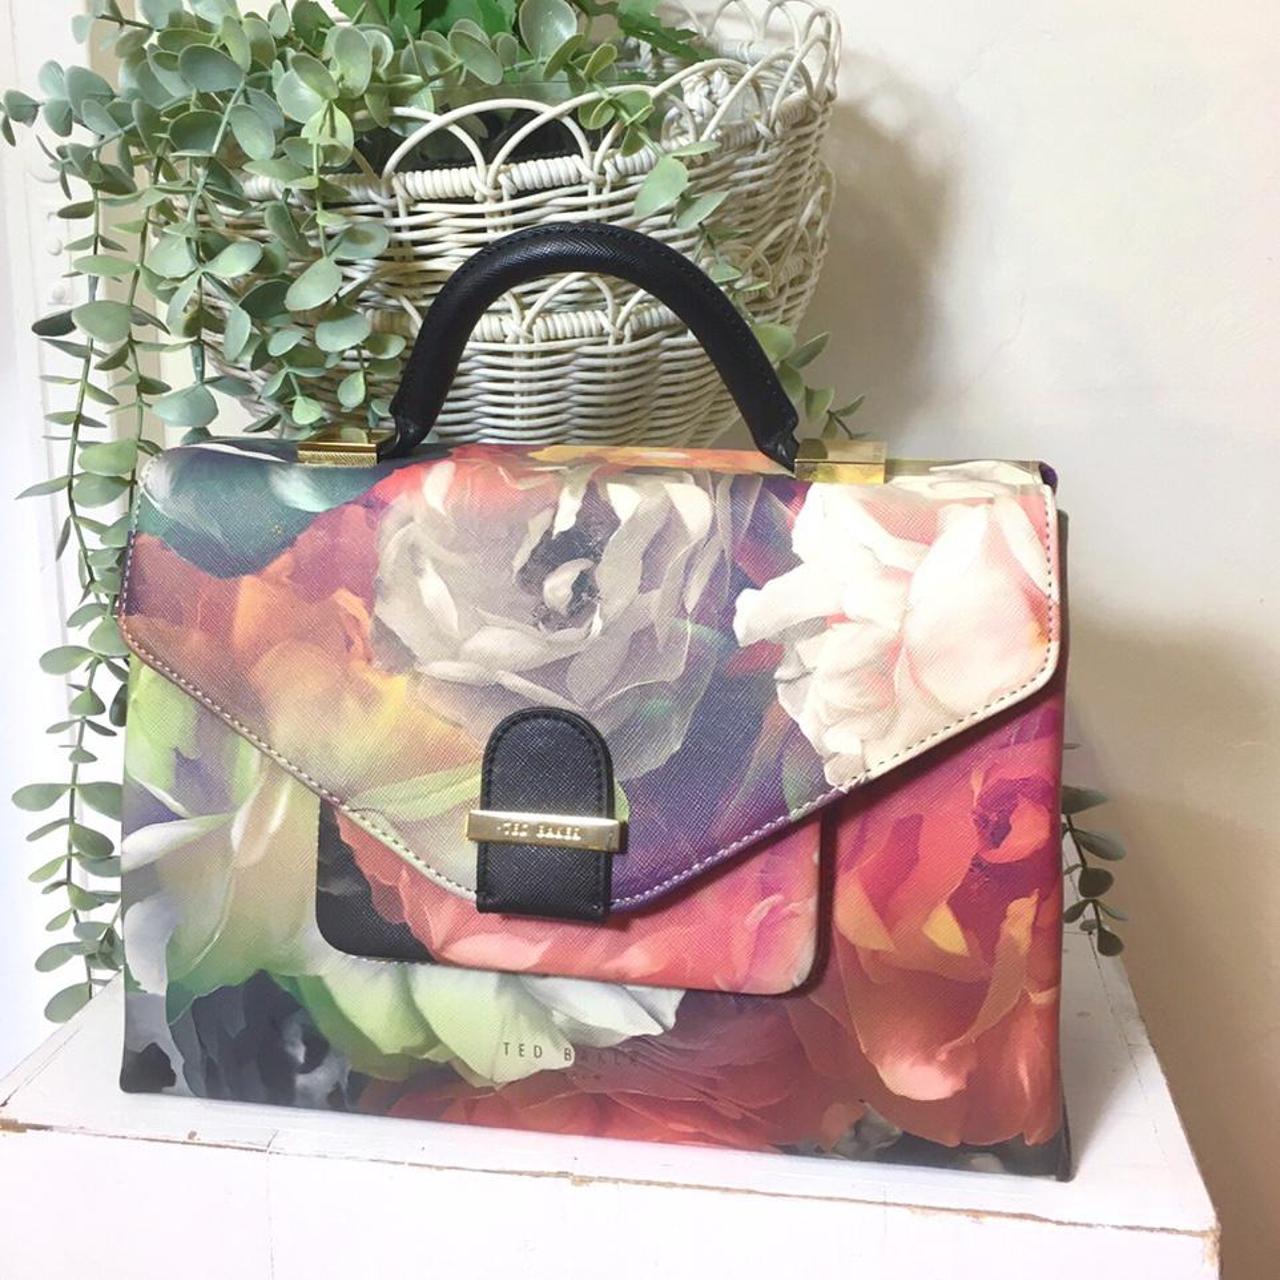 Product Image 1 - Iconic rose print Ted Baker